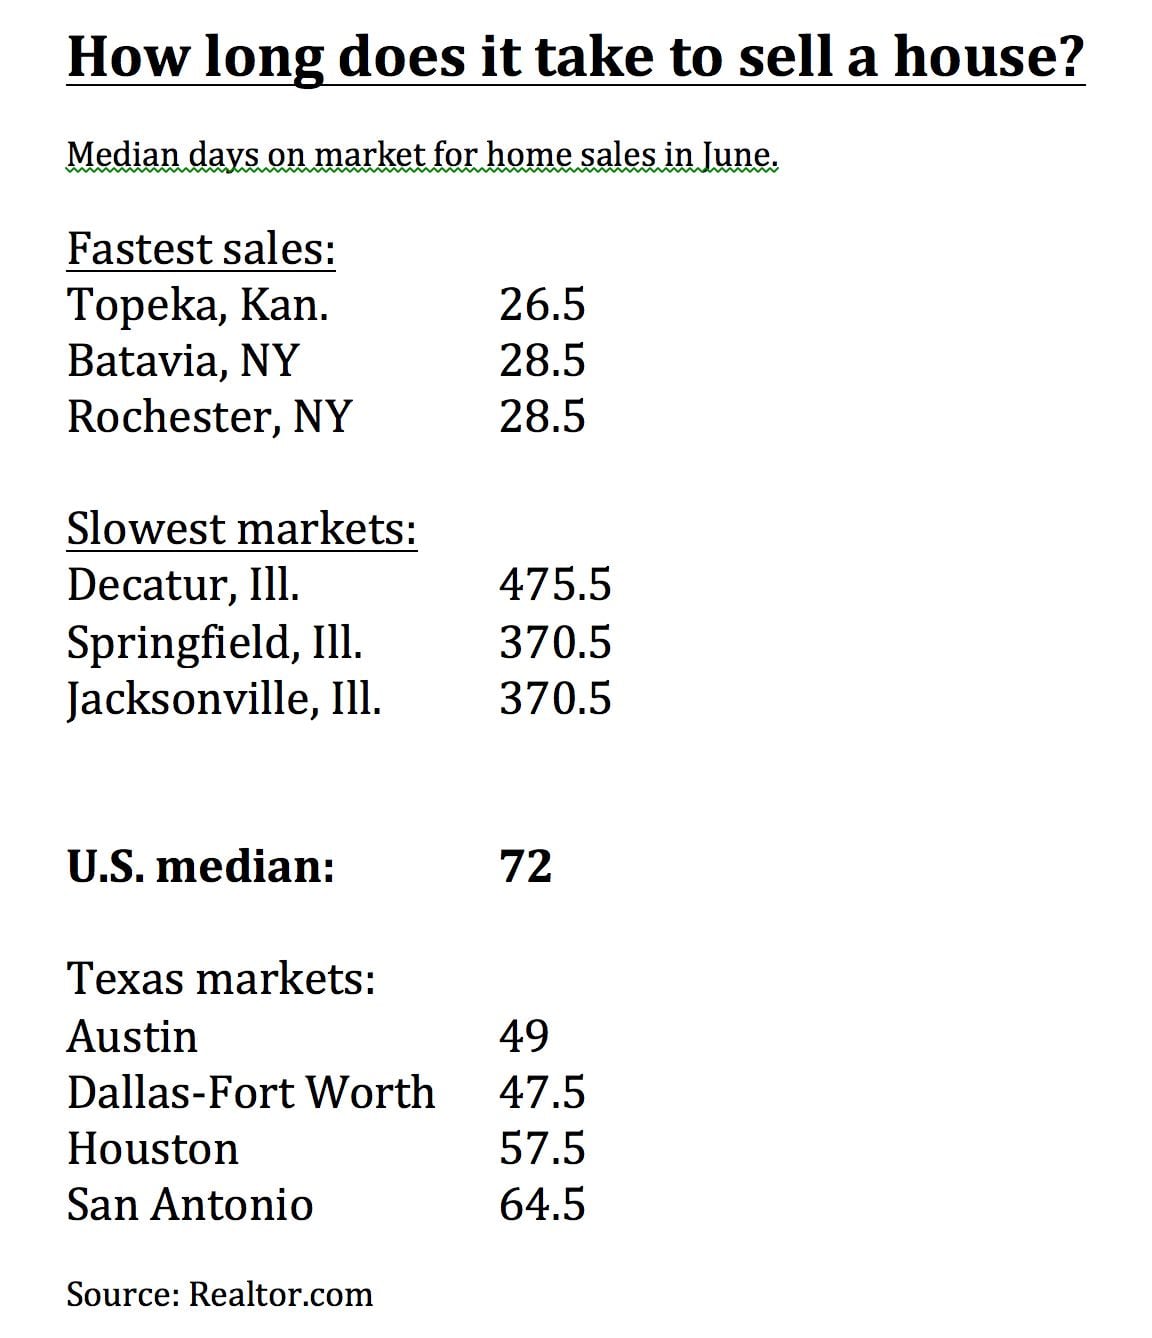 Homes sell faster in D-FW than any other major Texas market.